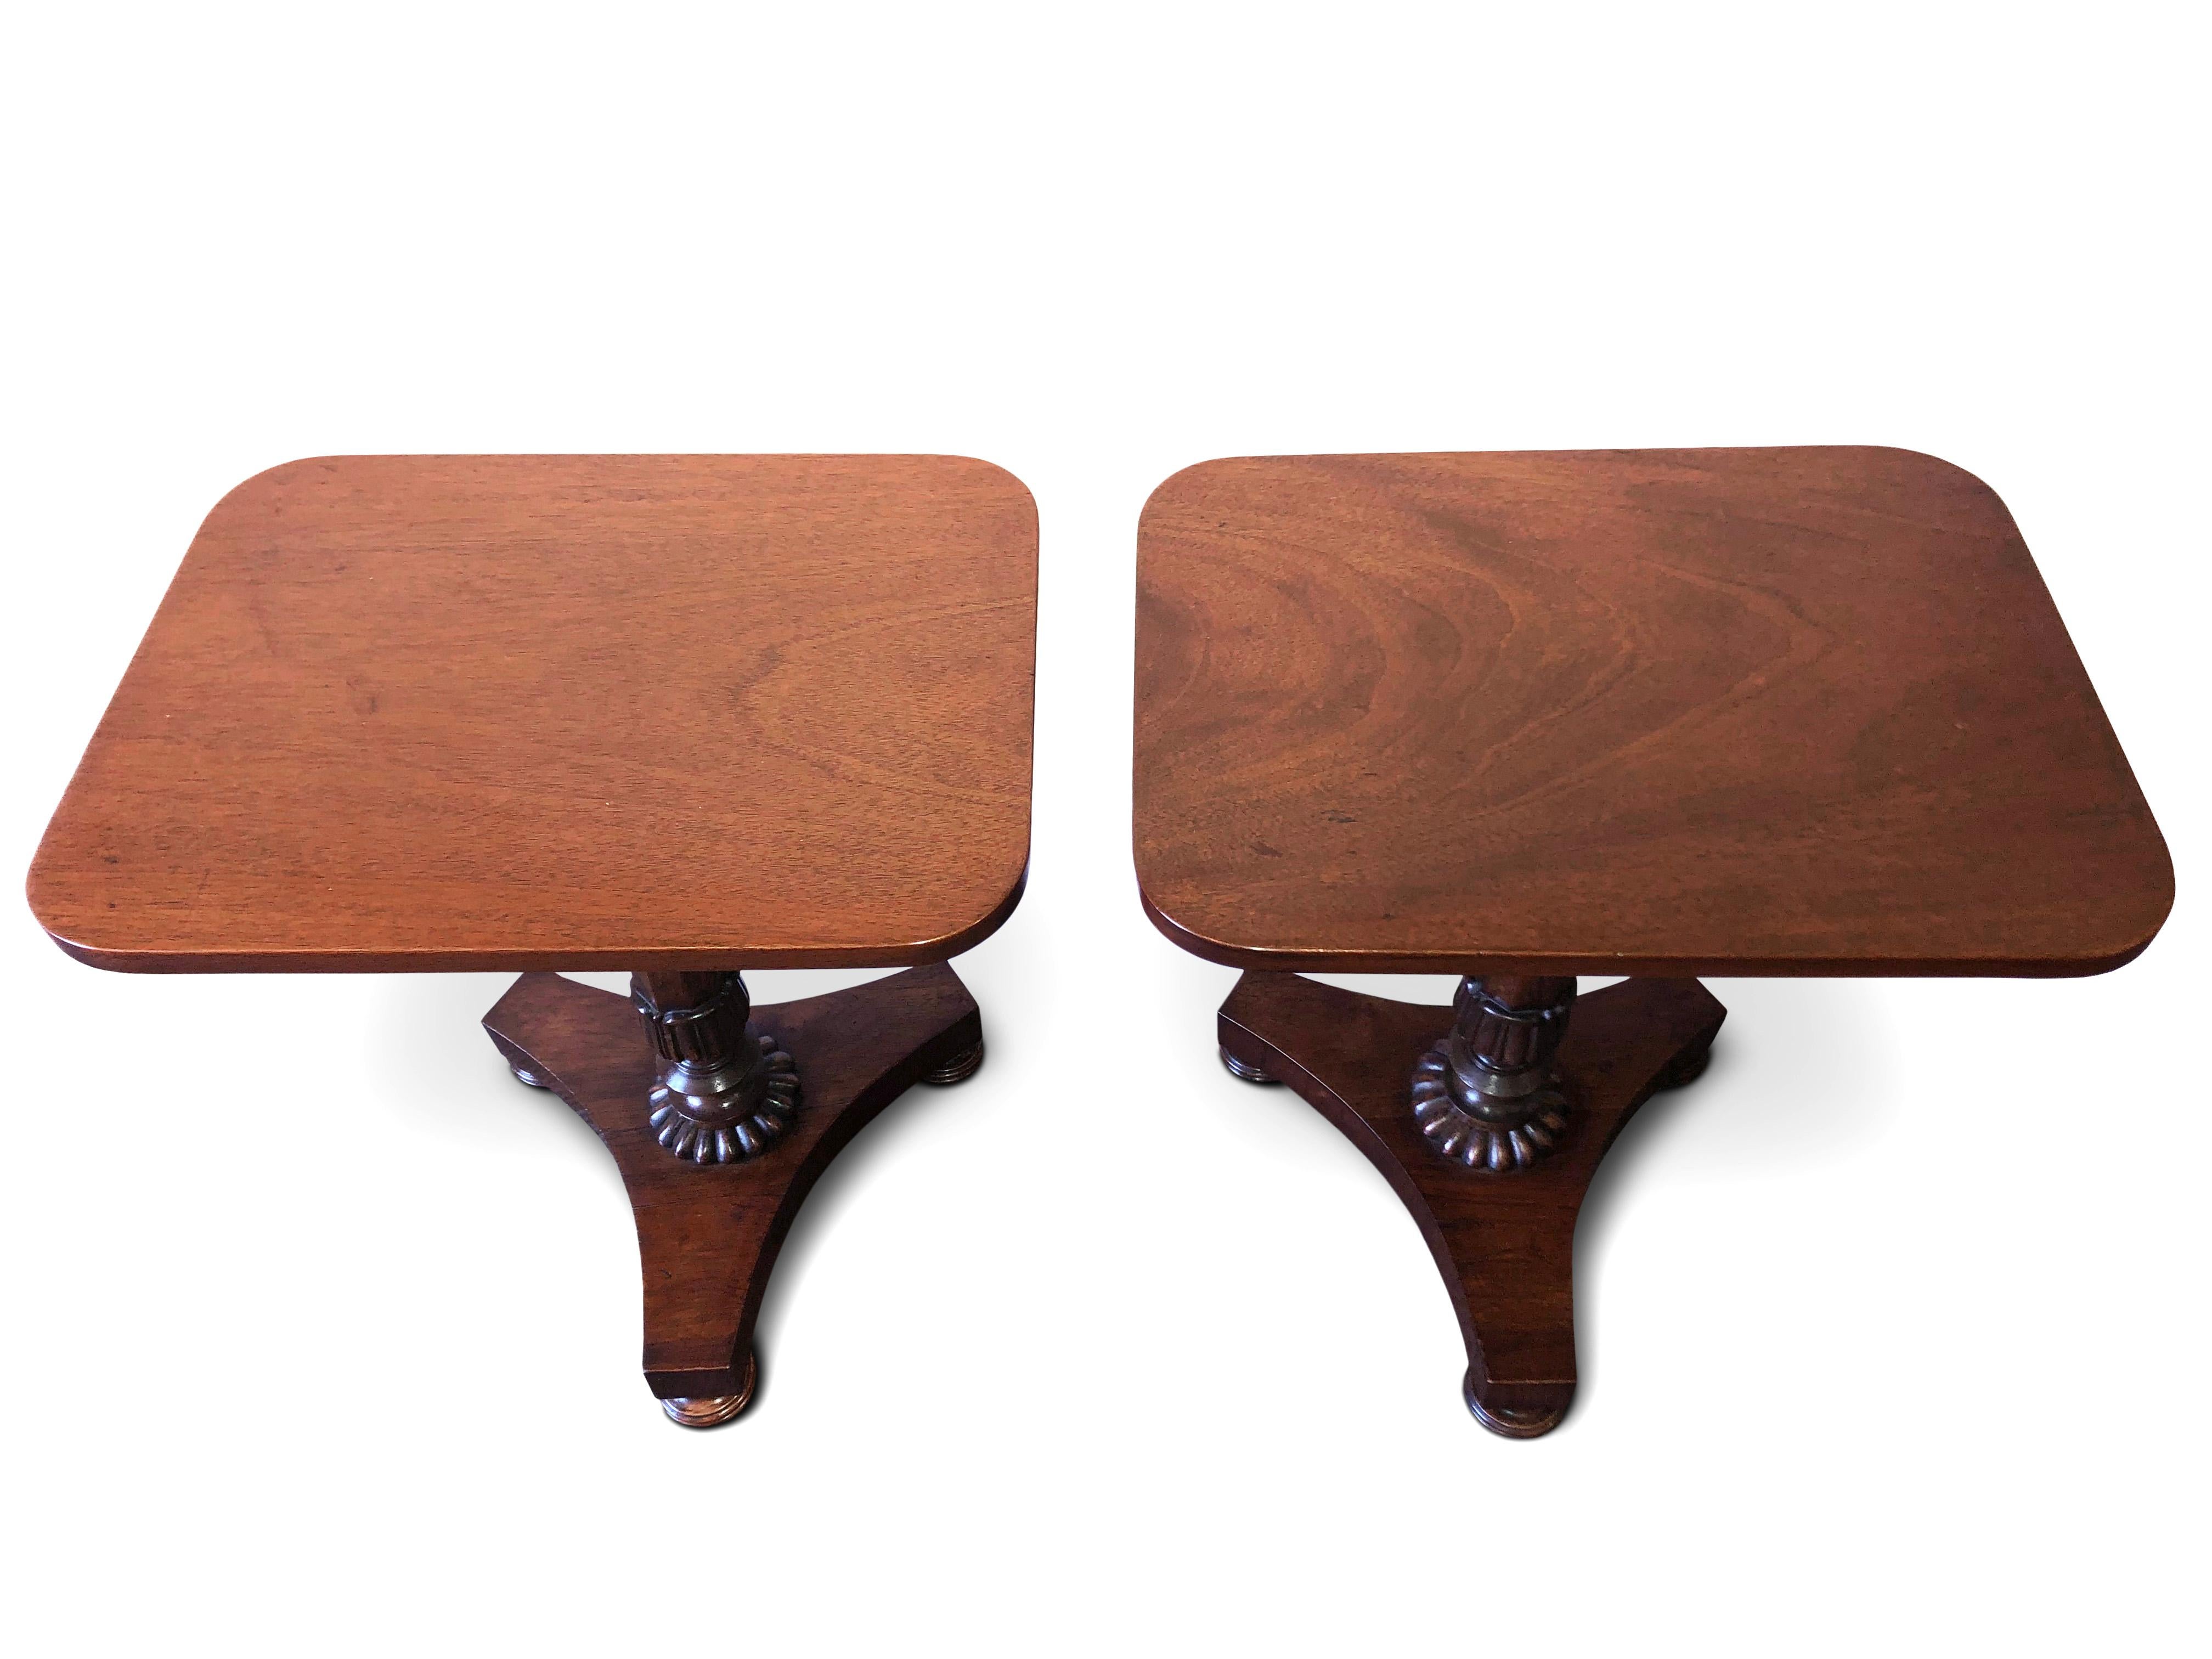 An unusual small pair of William IV wide tables, circa 1835
Rectangular tops, hexagonal Columns with gadrooned collars, resting on triform bases with bun feet.

(Probably adapted in height).